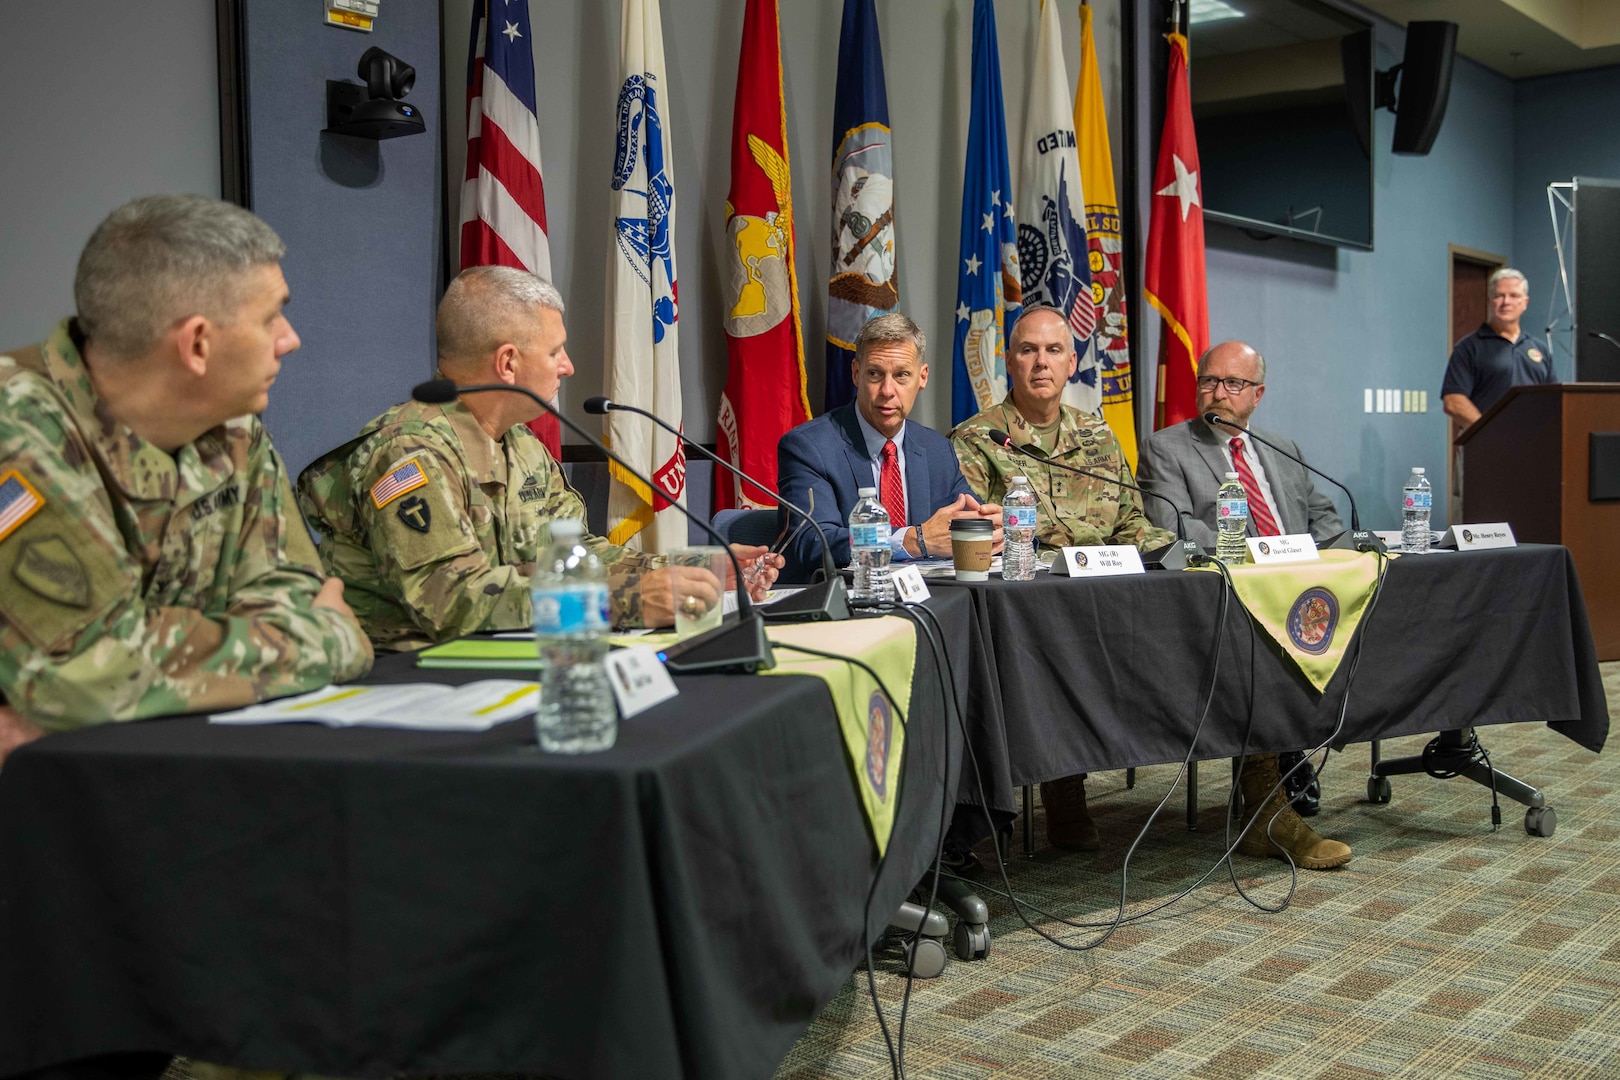 Federal Emergency Management Agency (FEMA) Director of Operations Division U.S. Army Maj. Gen. (ret) William Roy, who also served as the Joint Task Force Civil Support (JTF-CS) commanding general from July 2014 to July 2016, speaks as part of a leadership panel during a Defense Chemical, Biological, Radiological and Nuclear (CBRN) Response Force (DRCF) leadership symposium. The symposium was held during JTF-CS’s 20th anniversary celebration, which also included a room dedication for the late U.S. Army Maj. Gen. (ret) Jeff Mathis III, who served as the command’s commanding general from July 2012 to July 2014. The celebration was attended by representatives from U.S. Northern Command (NORTHCOM) and U.S. Army North (ARNORTH), DCRF unit commanders and FEMA regional leaders, as well as prior JTF-CS members and alumni. (Official DoD photo by Mass Communication Specialist 3rd Class Michael Redd/RELEASED)